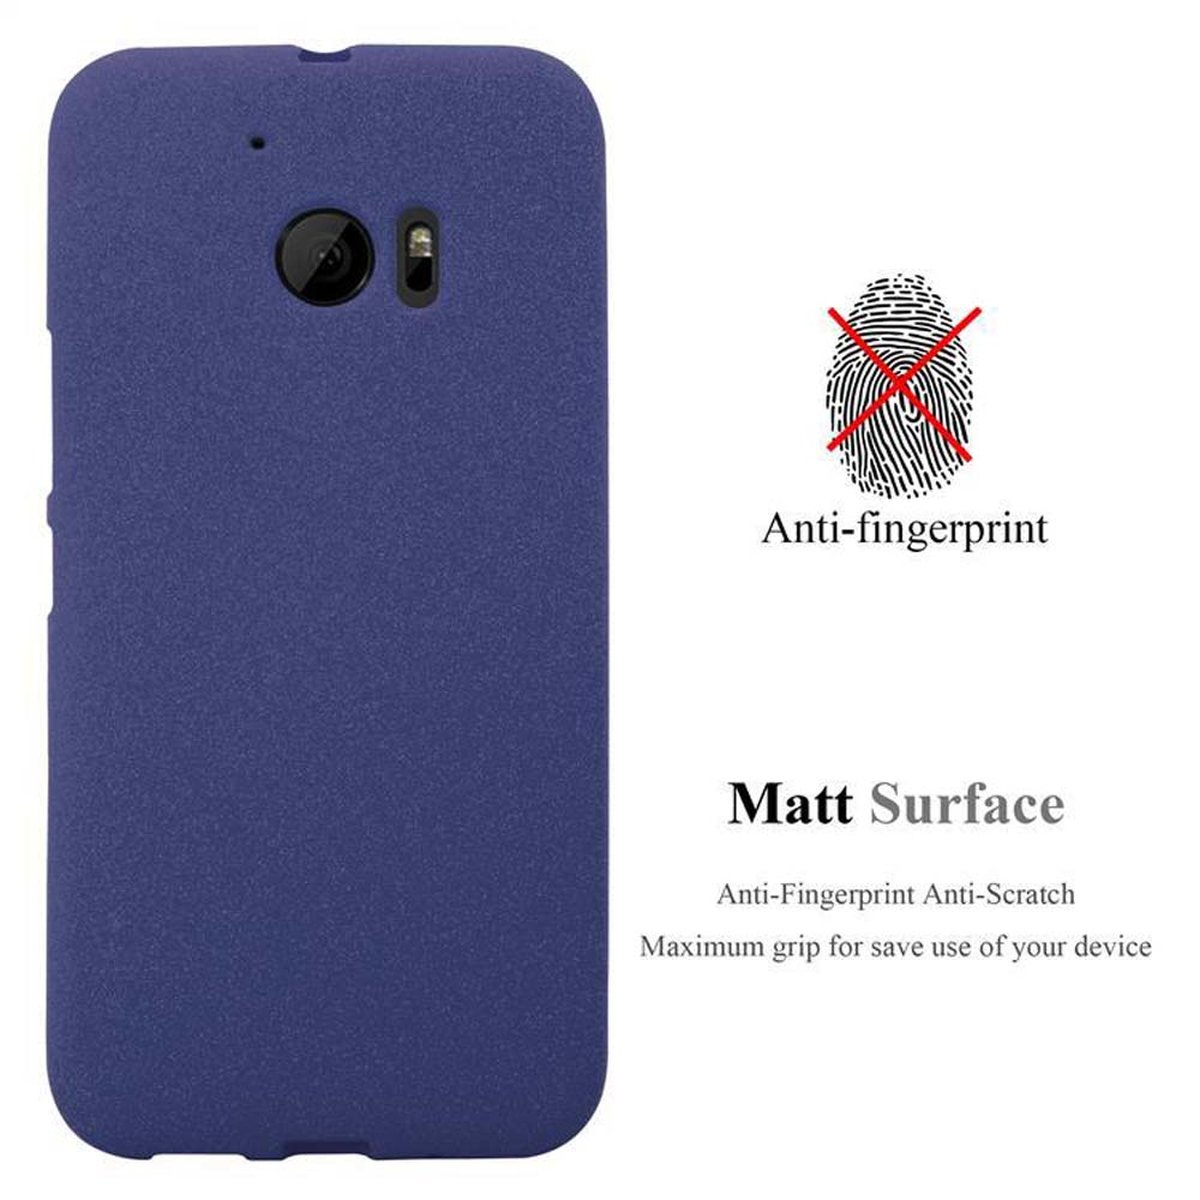 M10, Frosted Backcover, ONE DUNKEL FROST TPU Schutzhülle, CADORABO HTC, BLAU